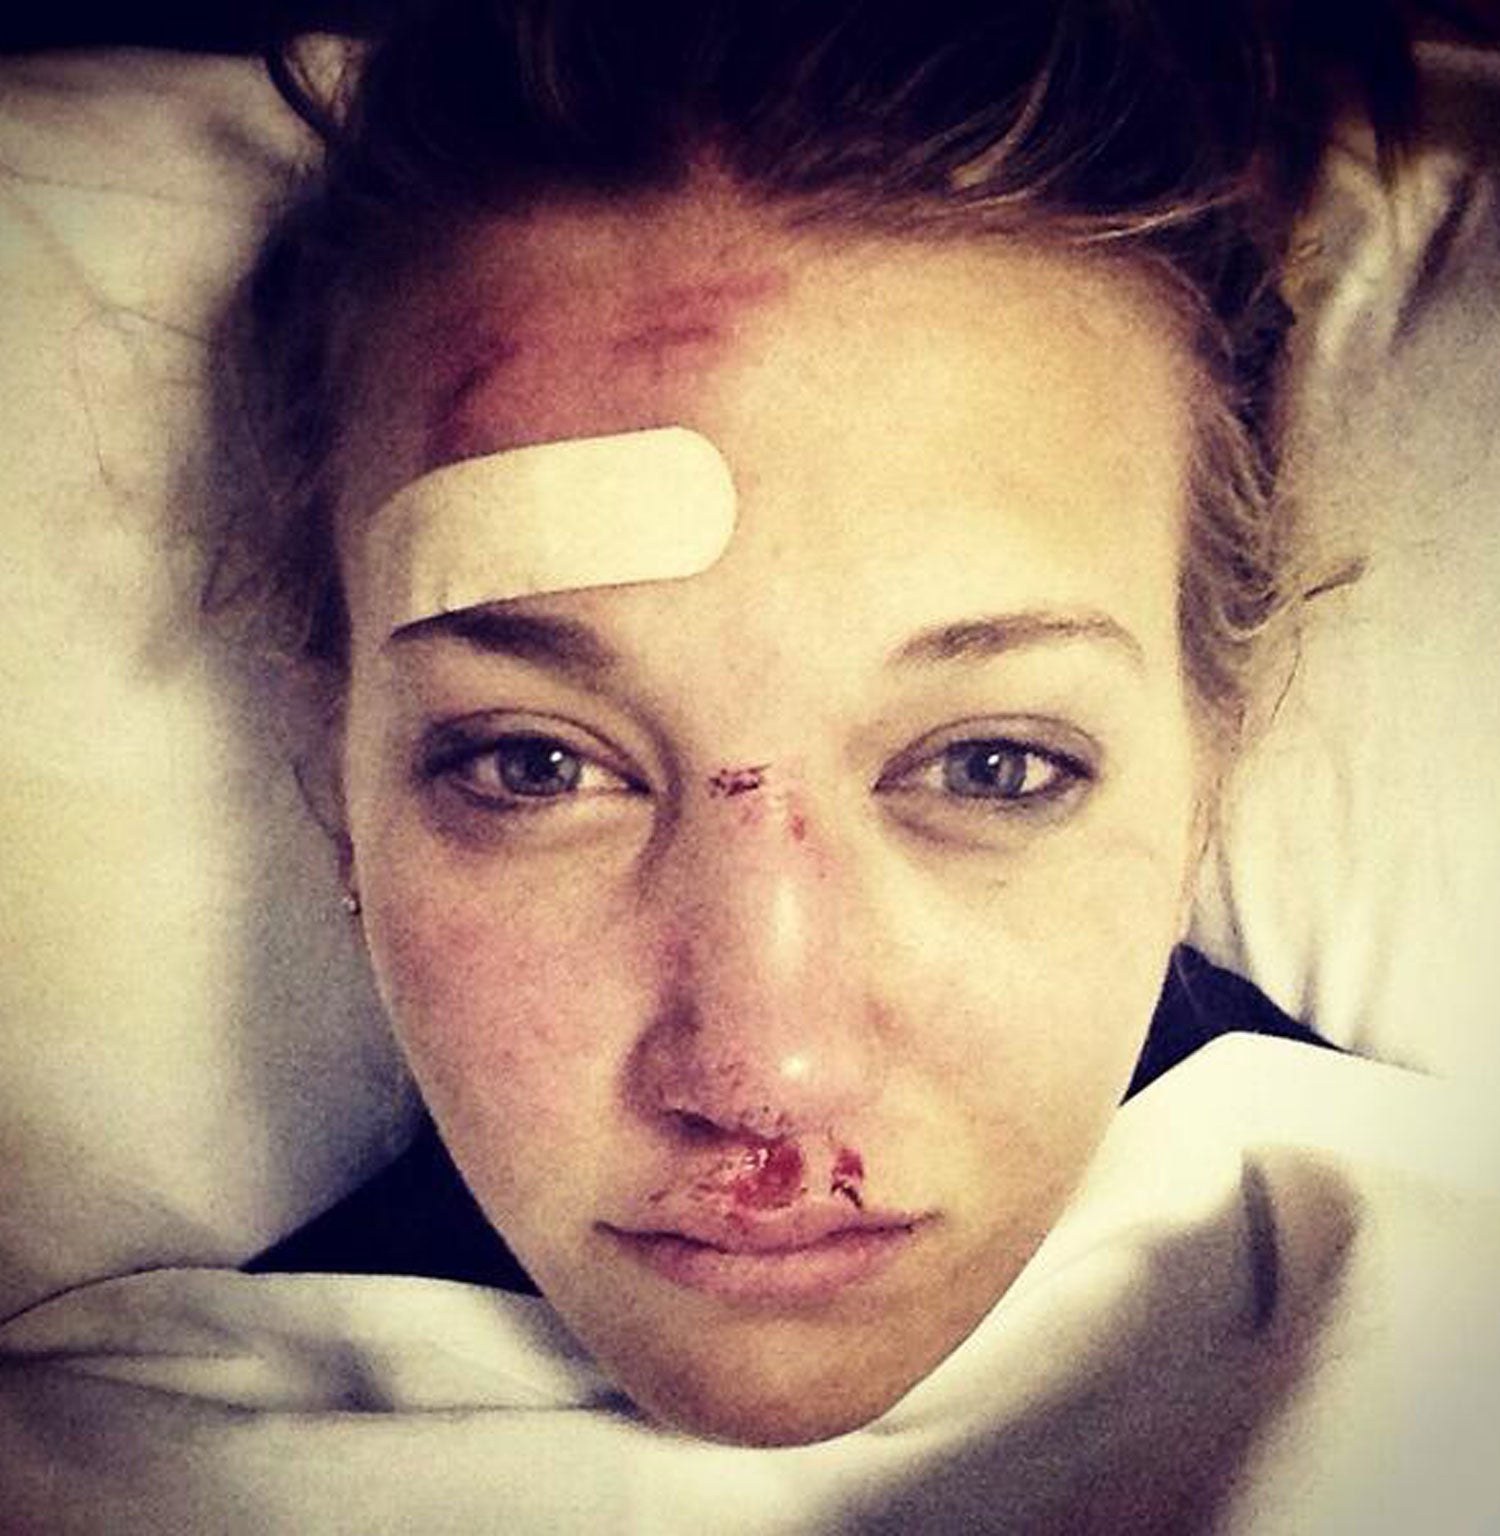 Rowan Cheshire posted this picture on Twitter showing the extent of her injuries from a skiing accident